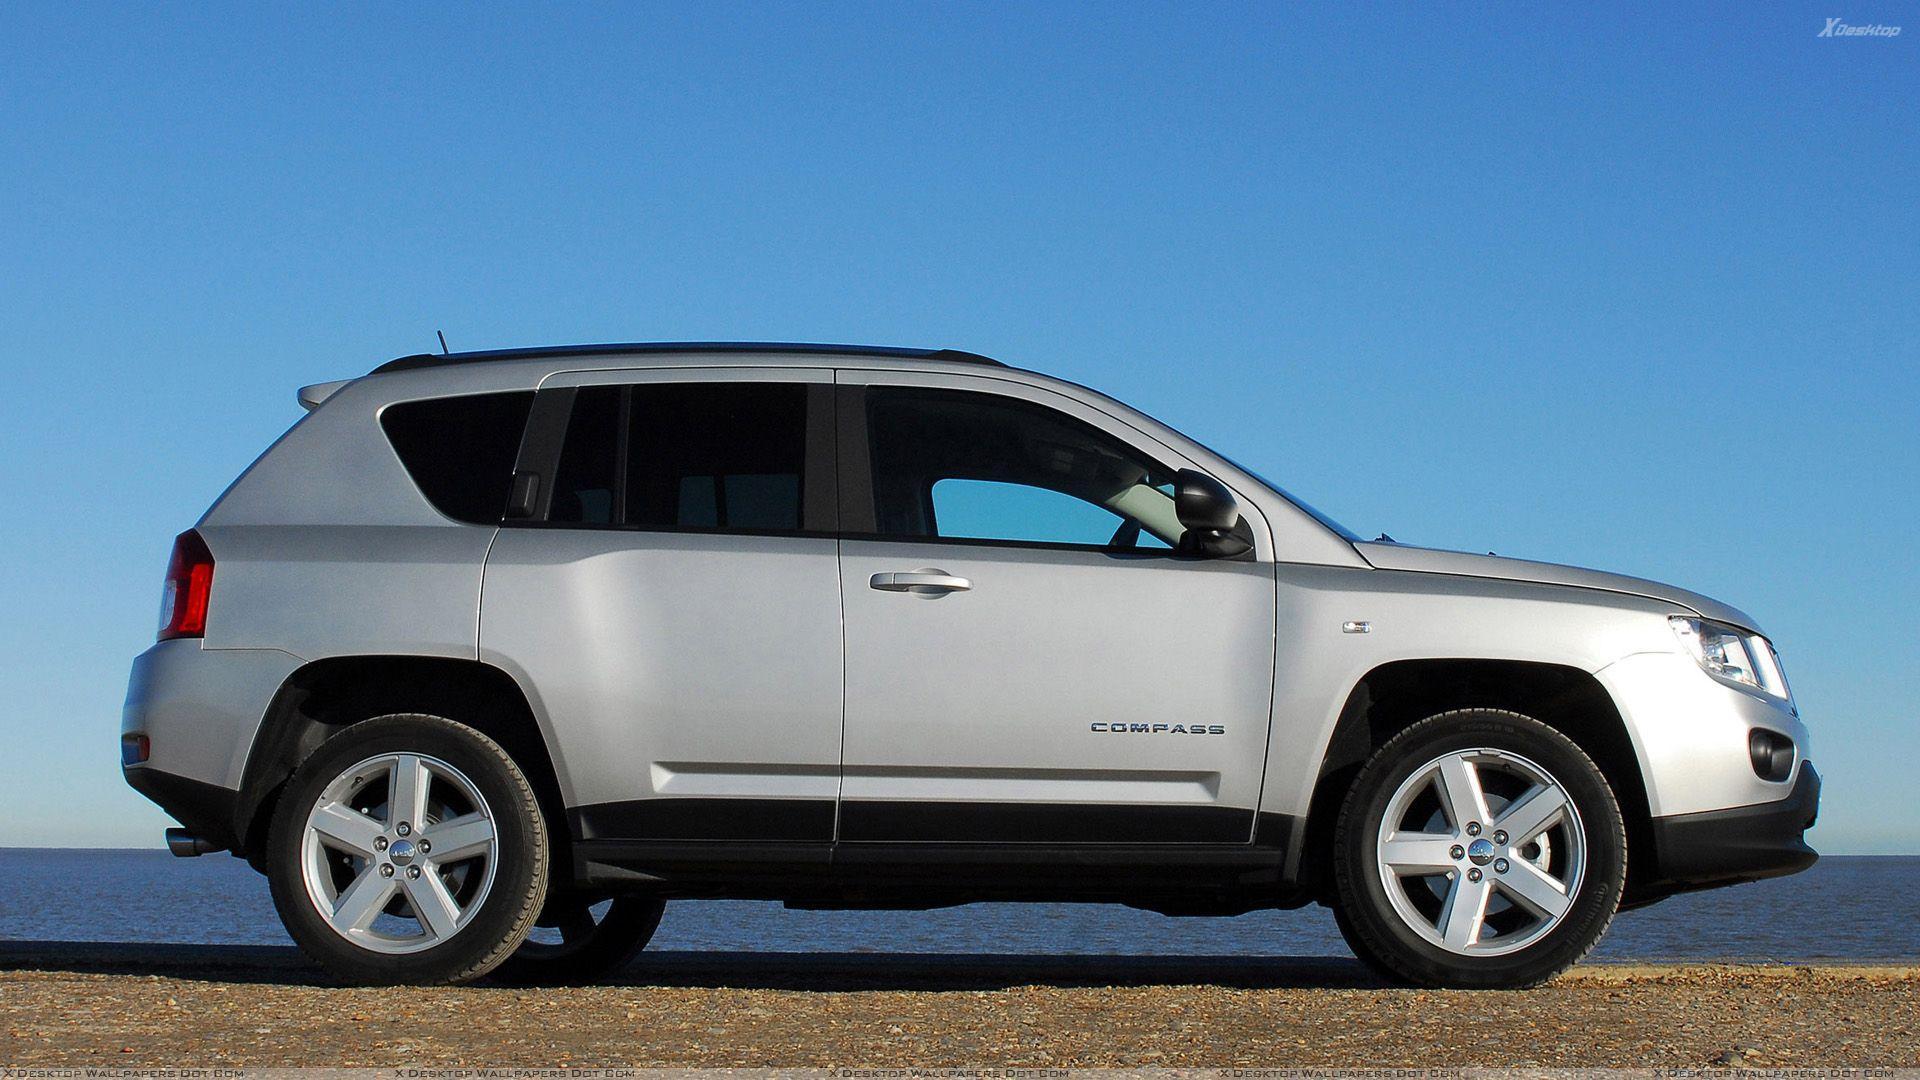 Jeep Compass Wallpapers, Photos & Wallpaper in HD